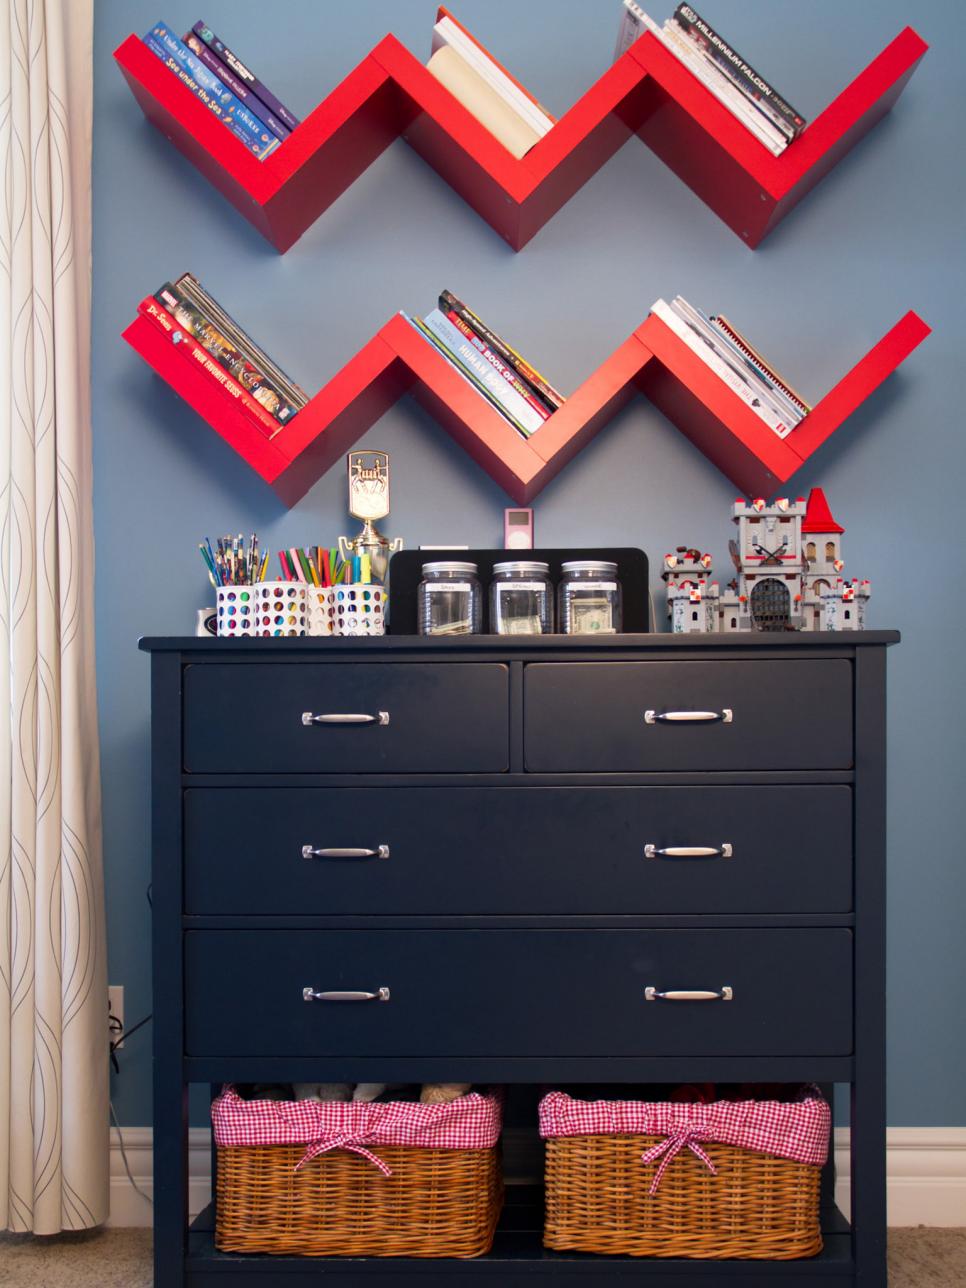 Floating Chevron-Shaped Red Shelves and Blue Dresser with Wicker Baskets